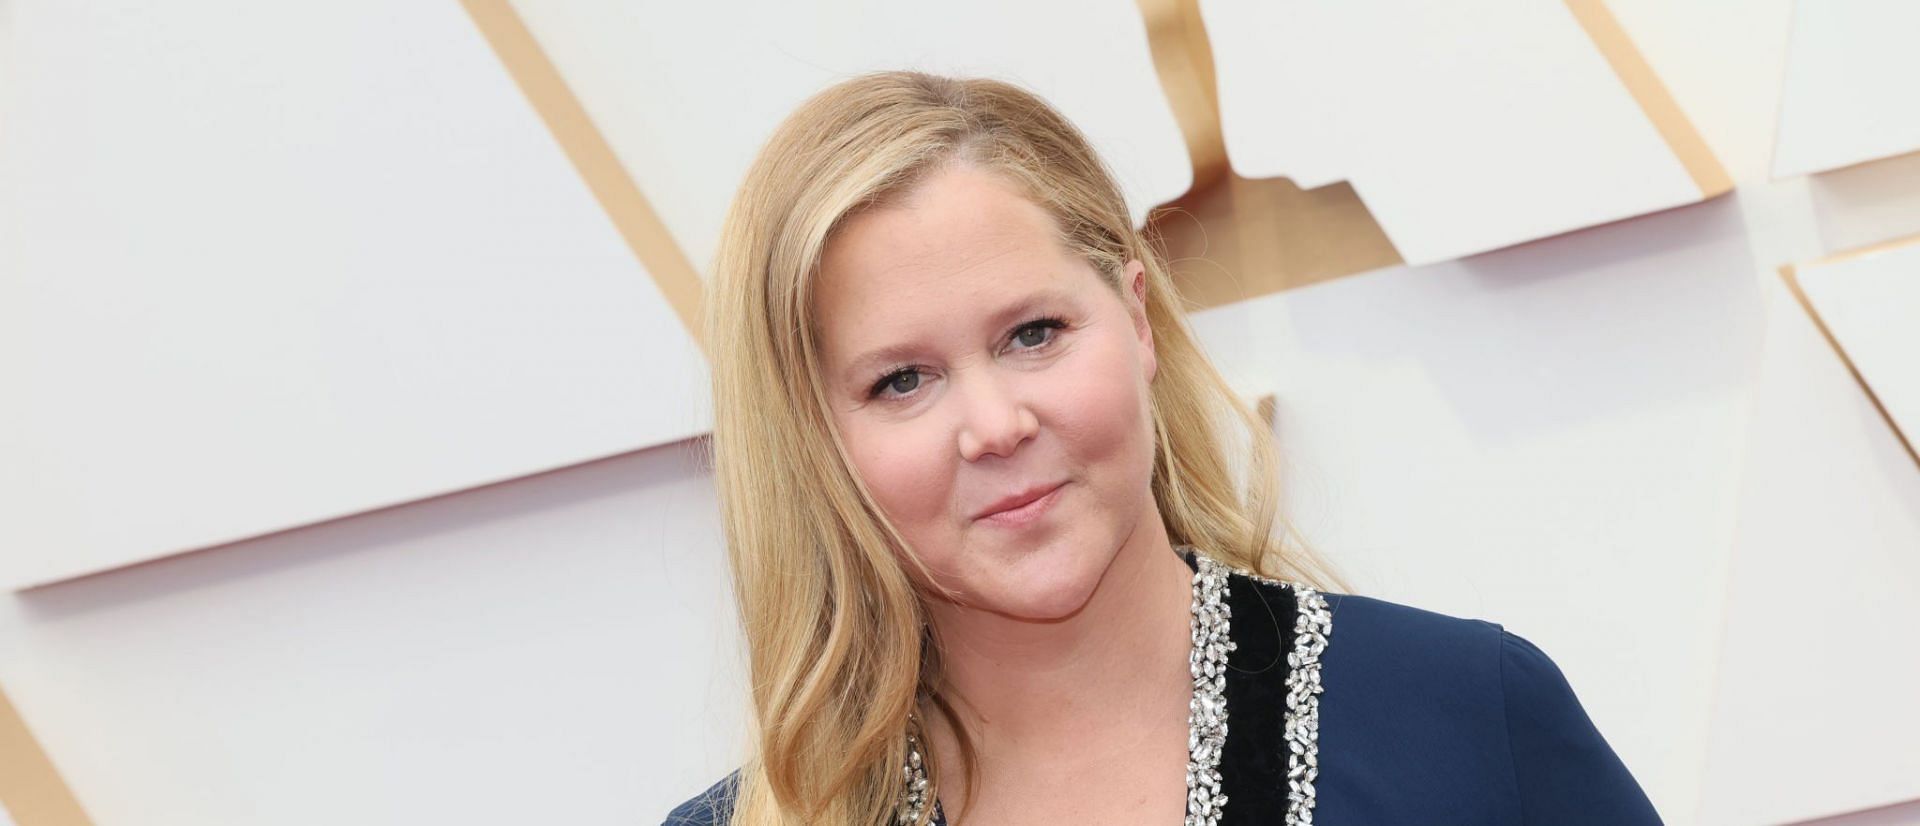 Amy Schumer was criticized after calling Kirsten Dunst a & quot; seat-filler & quot;  at the 2022 Oscars (Image via David Livingston / Getty Images)